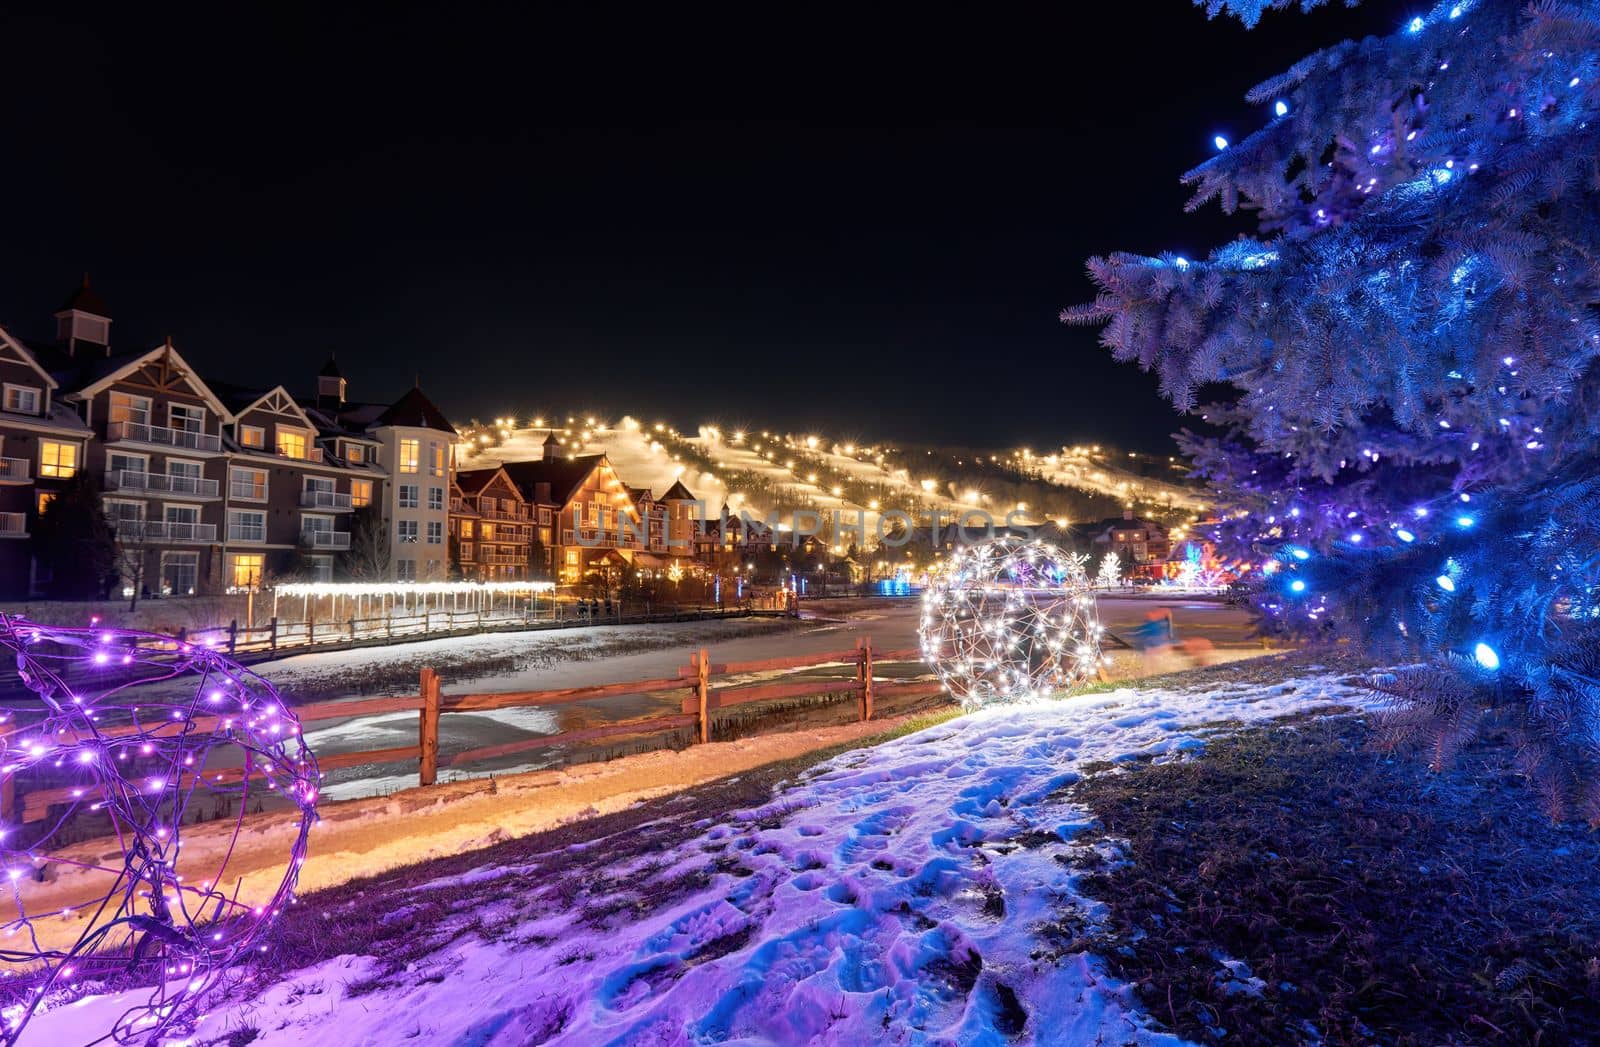 Blue Mountain Village in winter Lit up with Christmas Lights at Night by markvandam